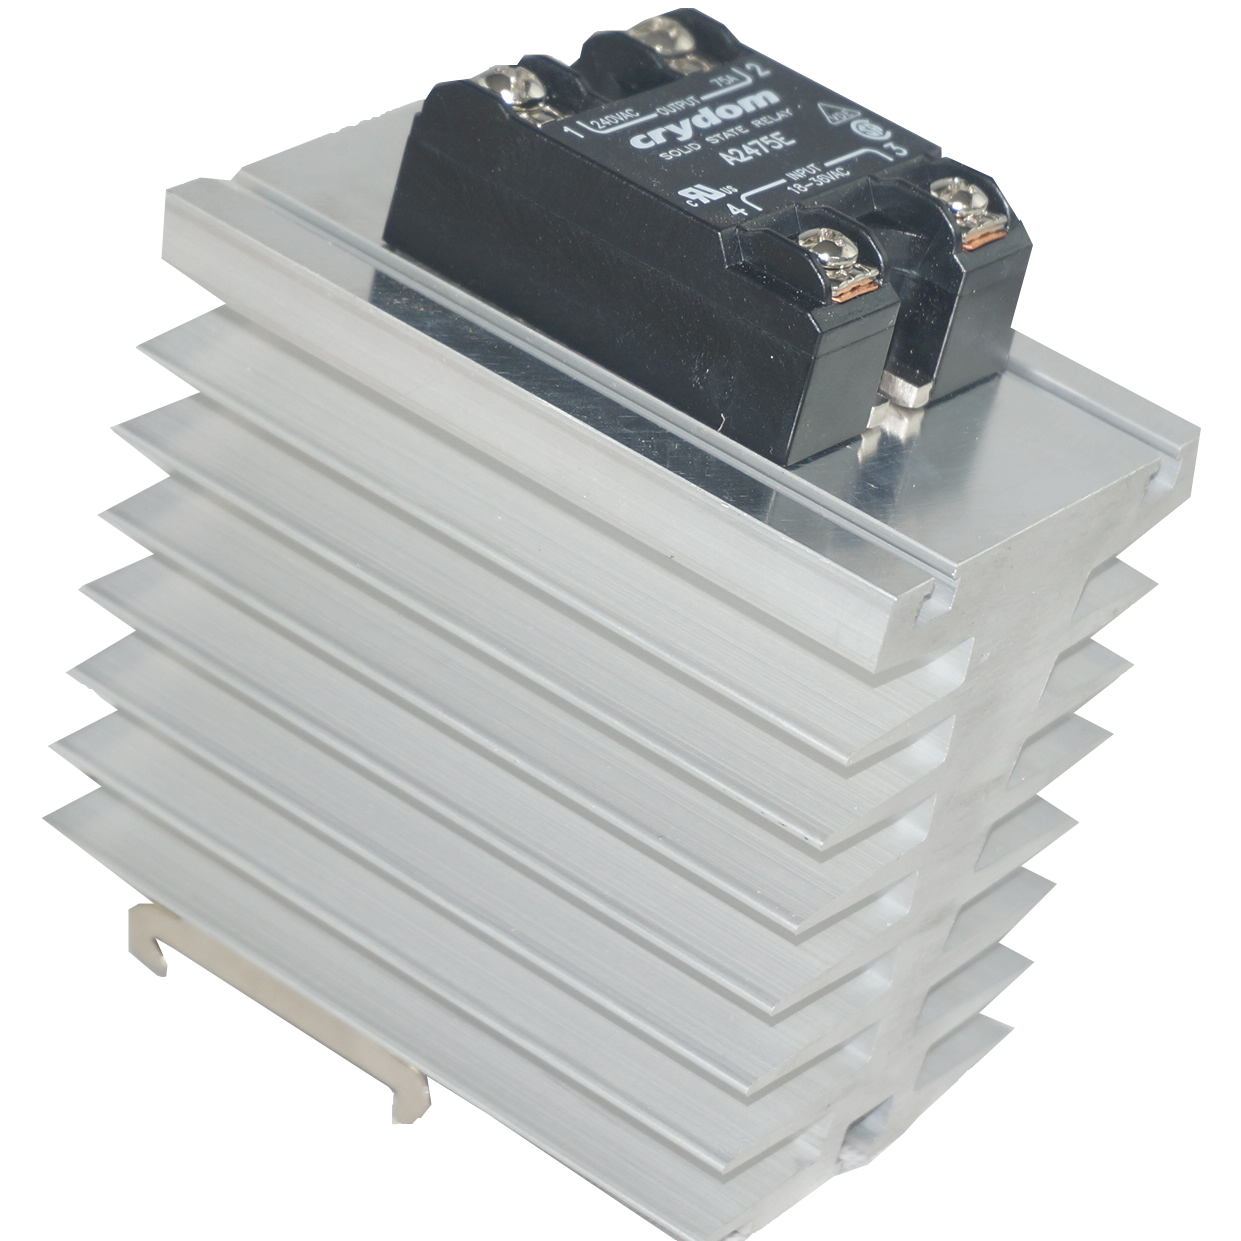 GFIN/100M-DR  + D2450, Din Rail Mount Solid State Relay with Heatsink, 4-32VDC Control Input, 48-660VAC Output, 50 Amps @ 40 Deg C ambient, with IP20 Cover